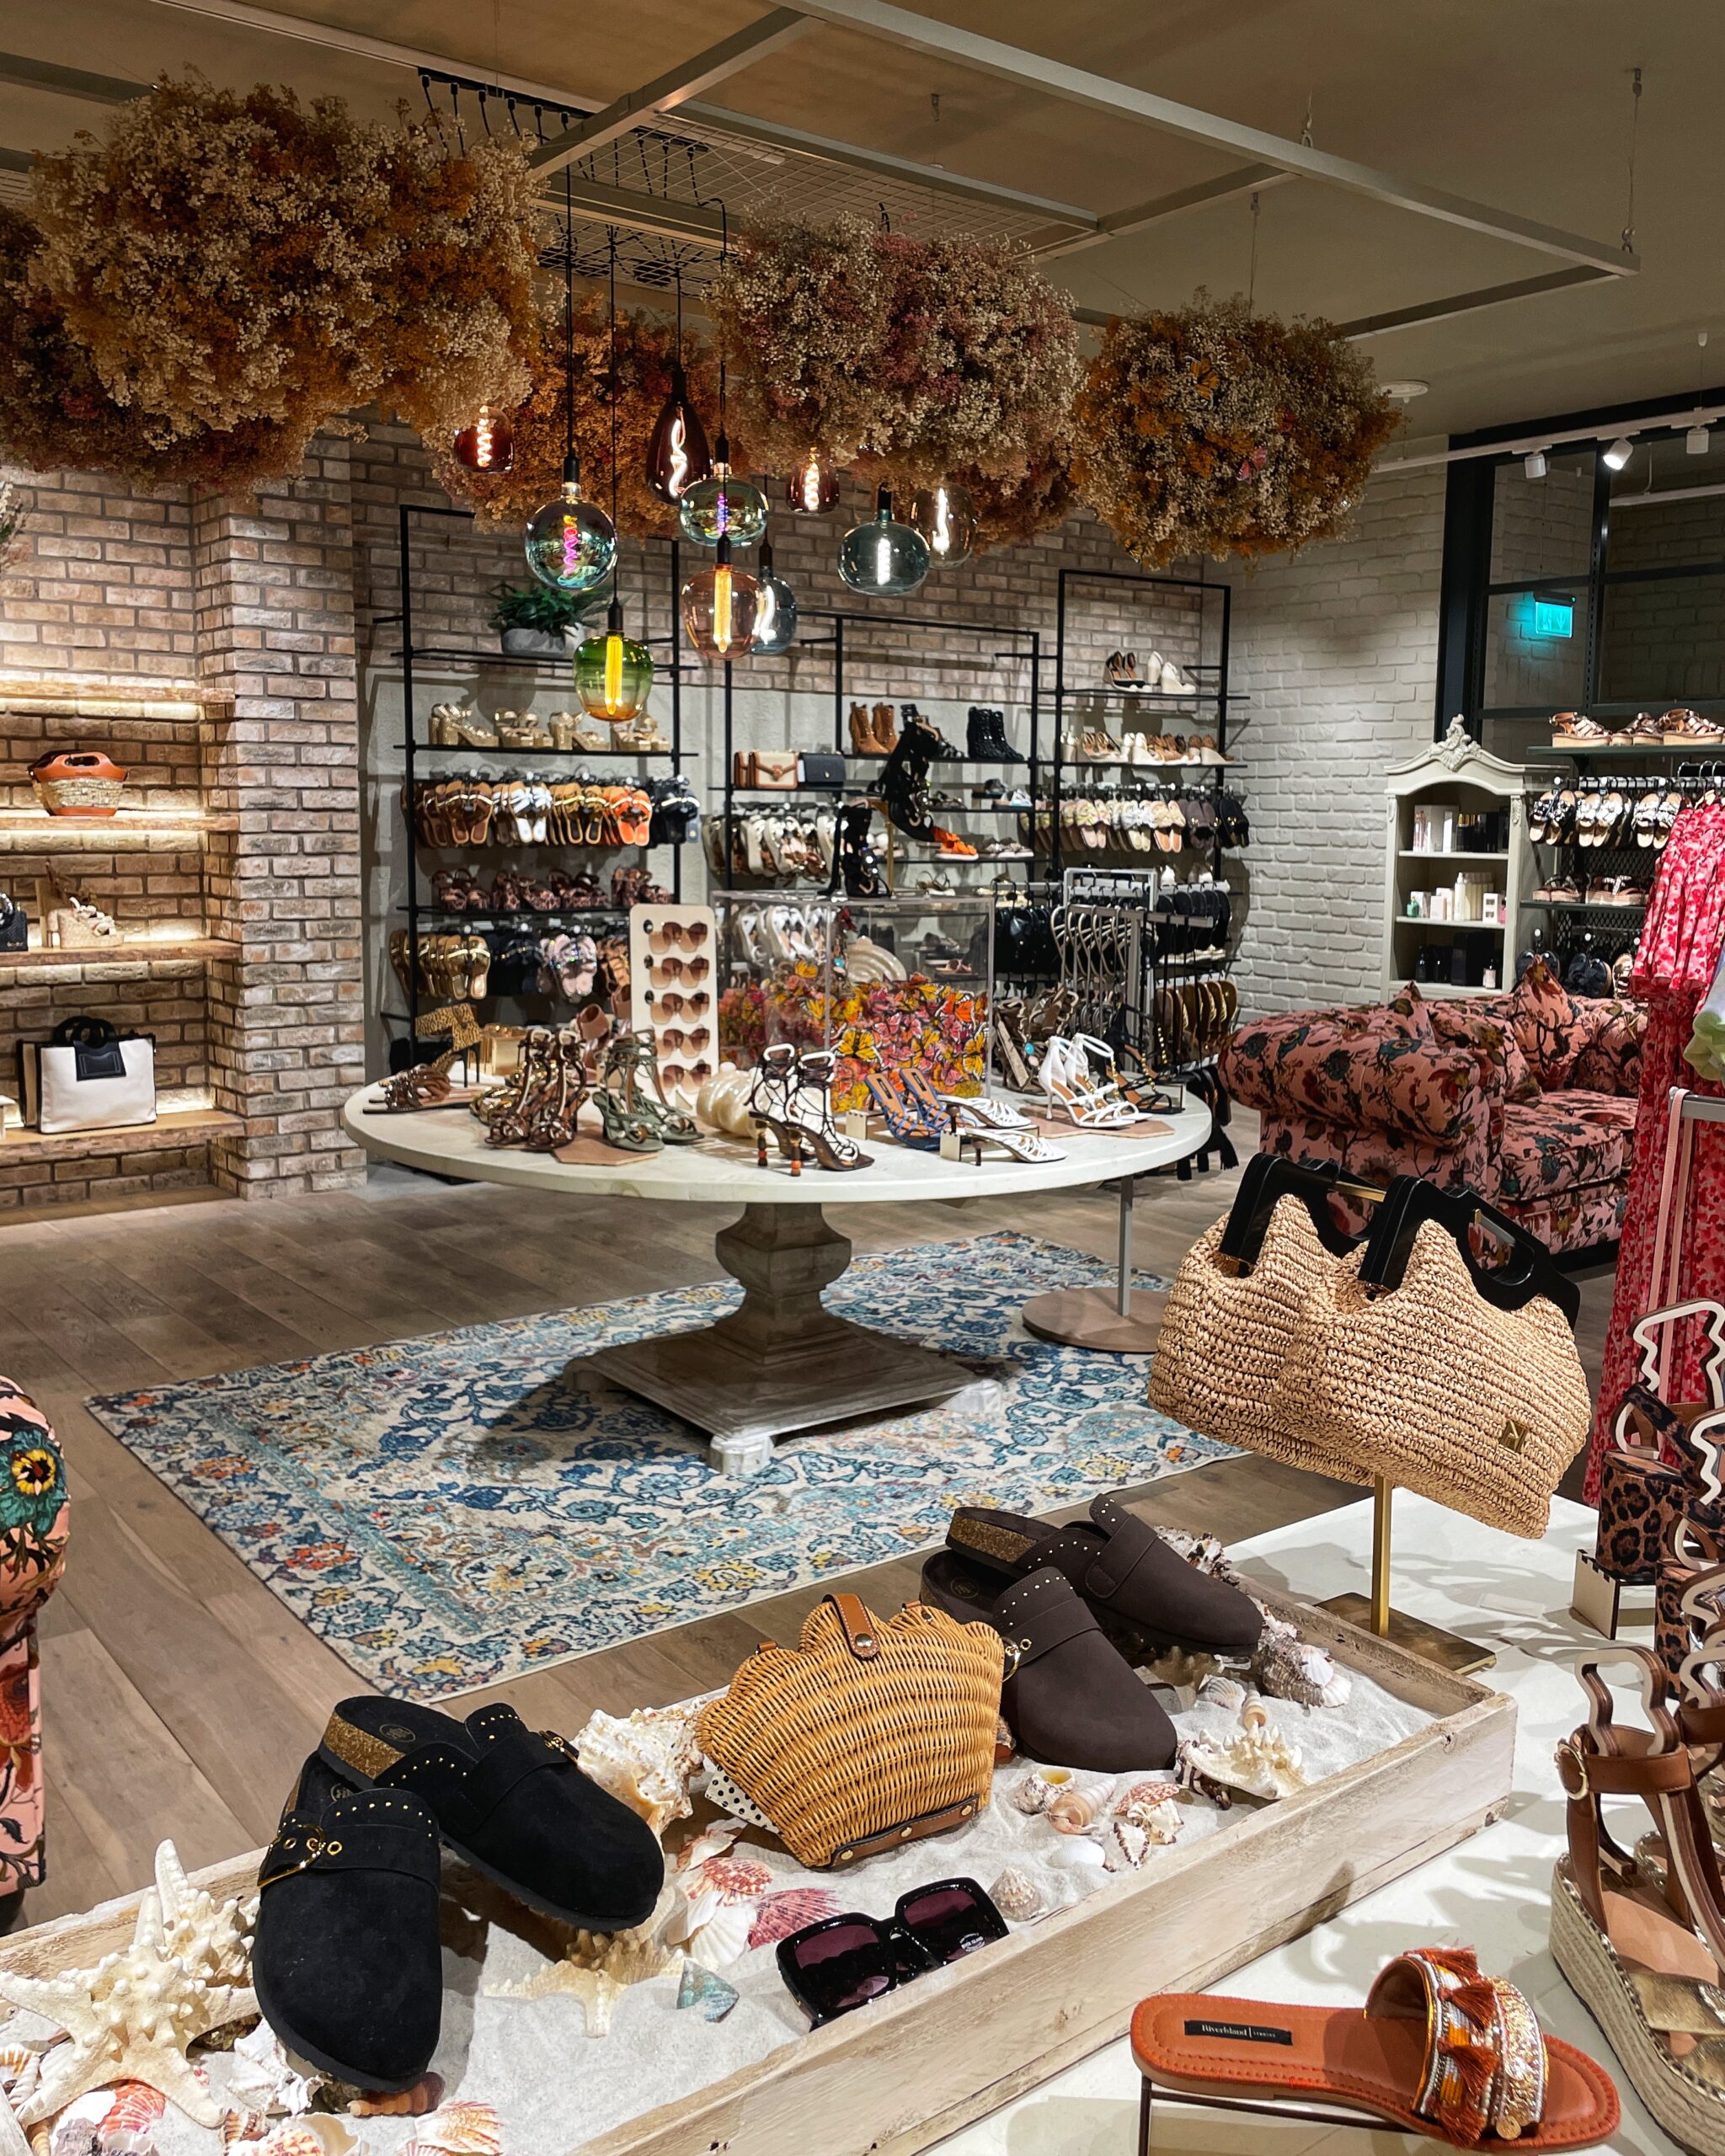 Accessories in River Island's new Manchester Arndale store